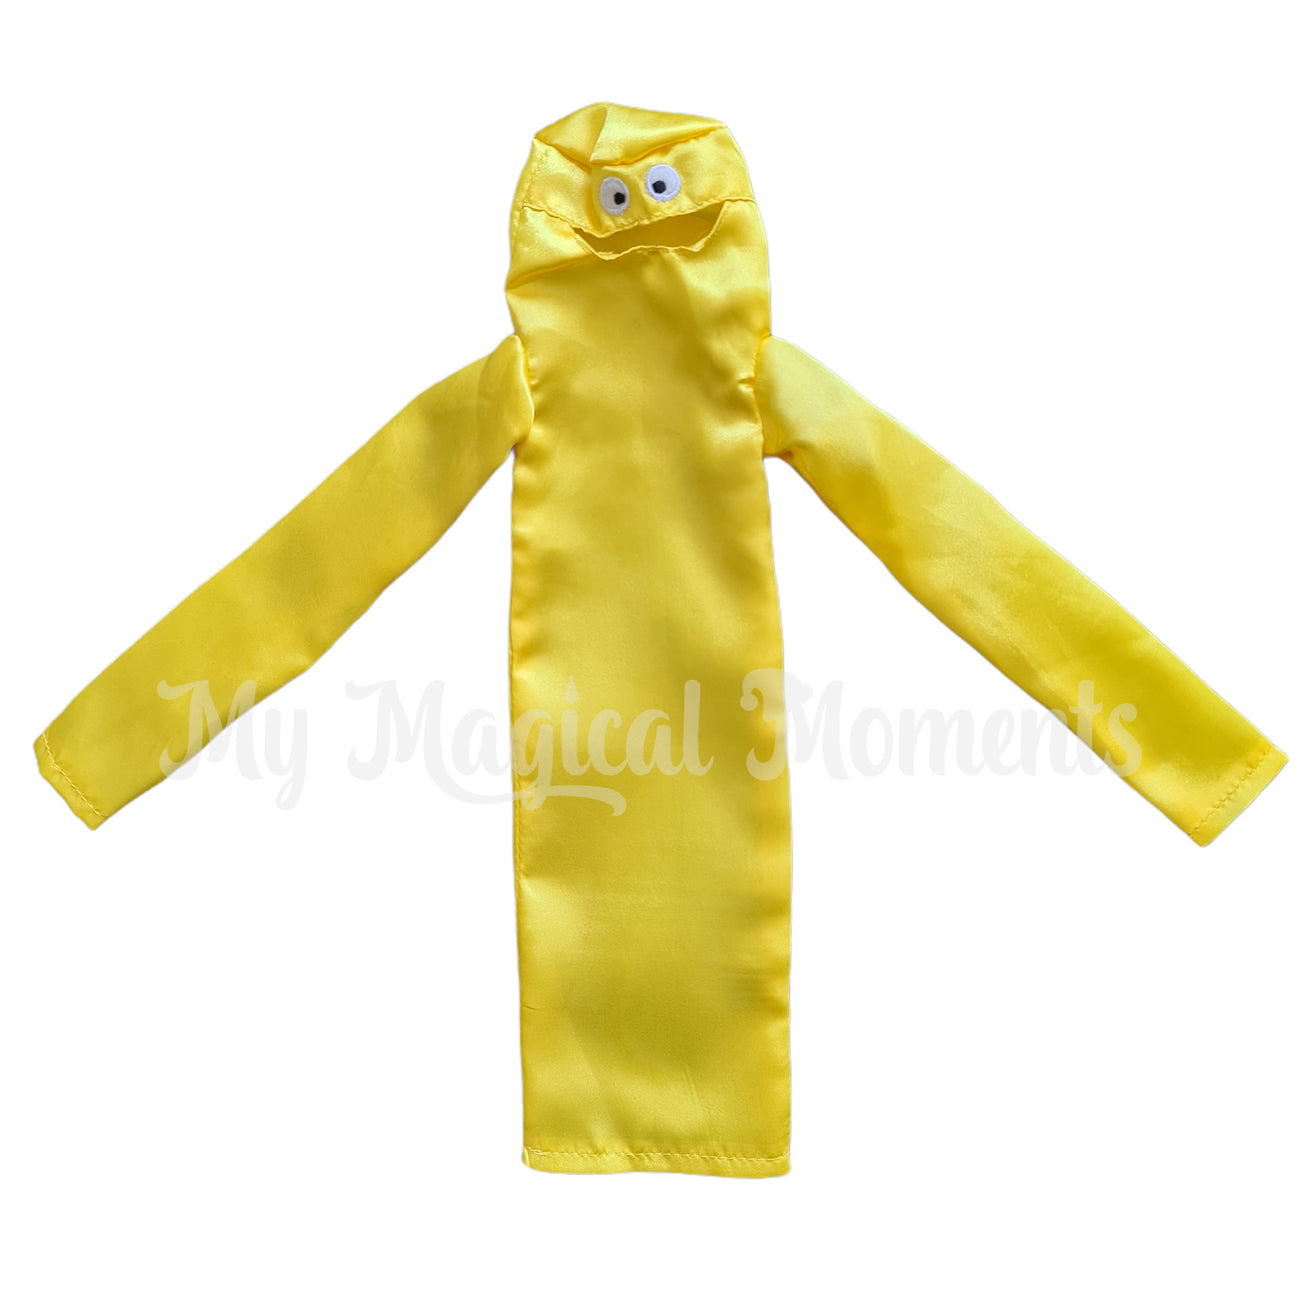 Yellow Wacky waving inflatable costume for the elf